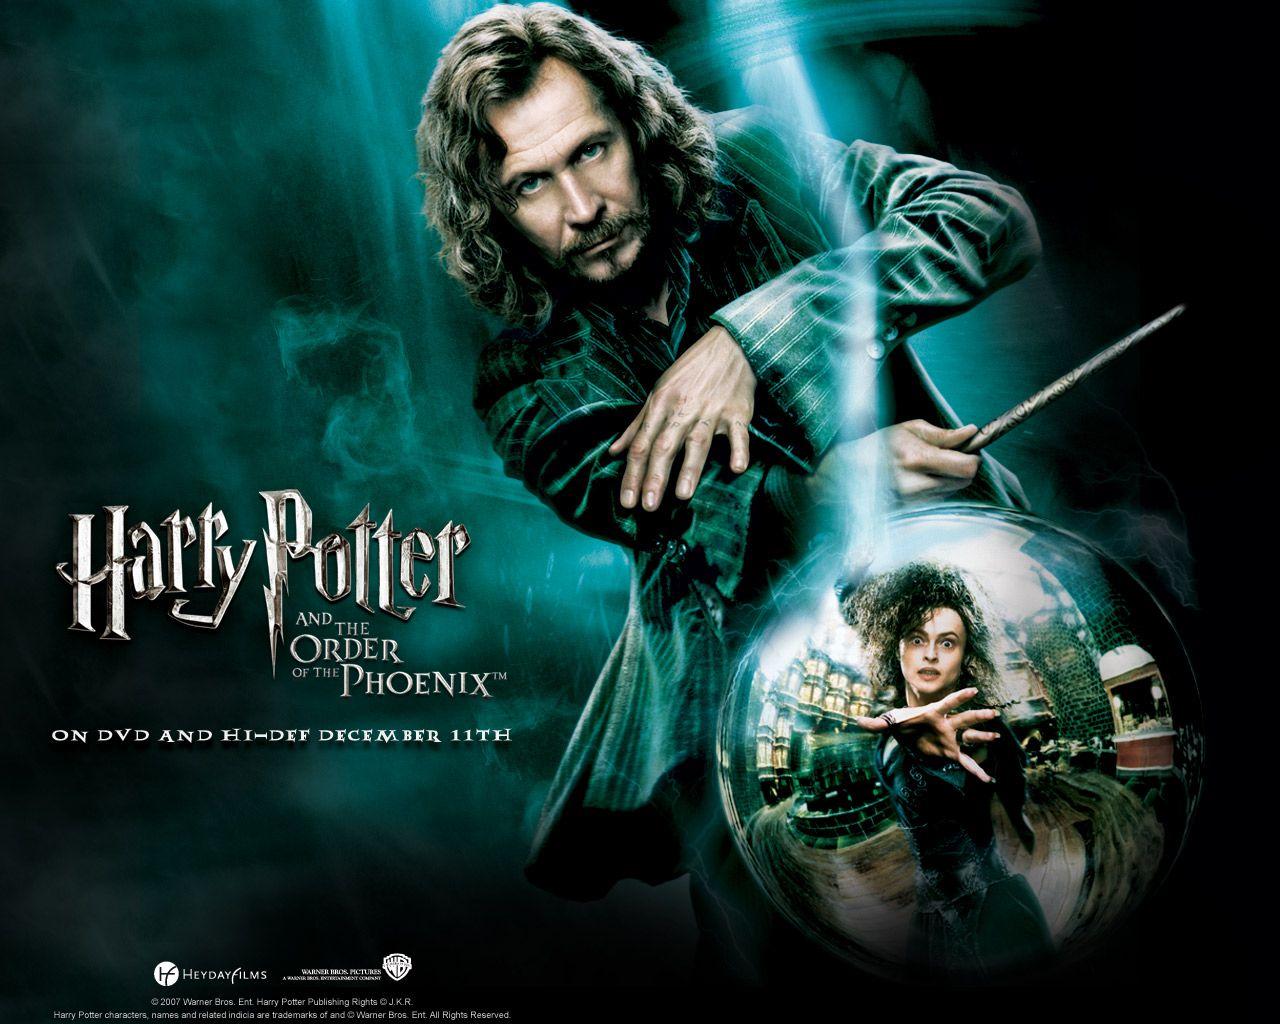 Download the Harry Potter 5 Wallpaper, Harry Potter 5 iPhone